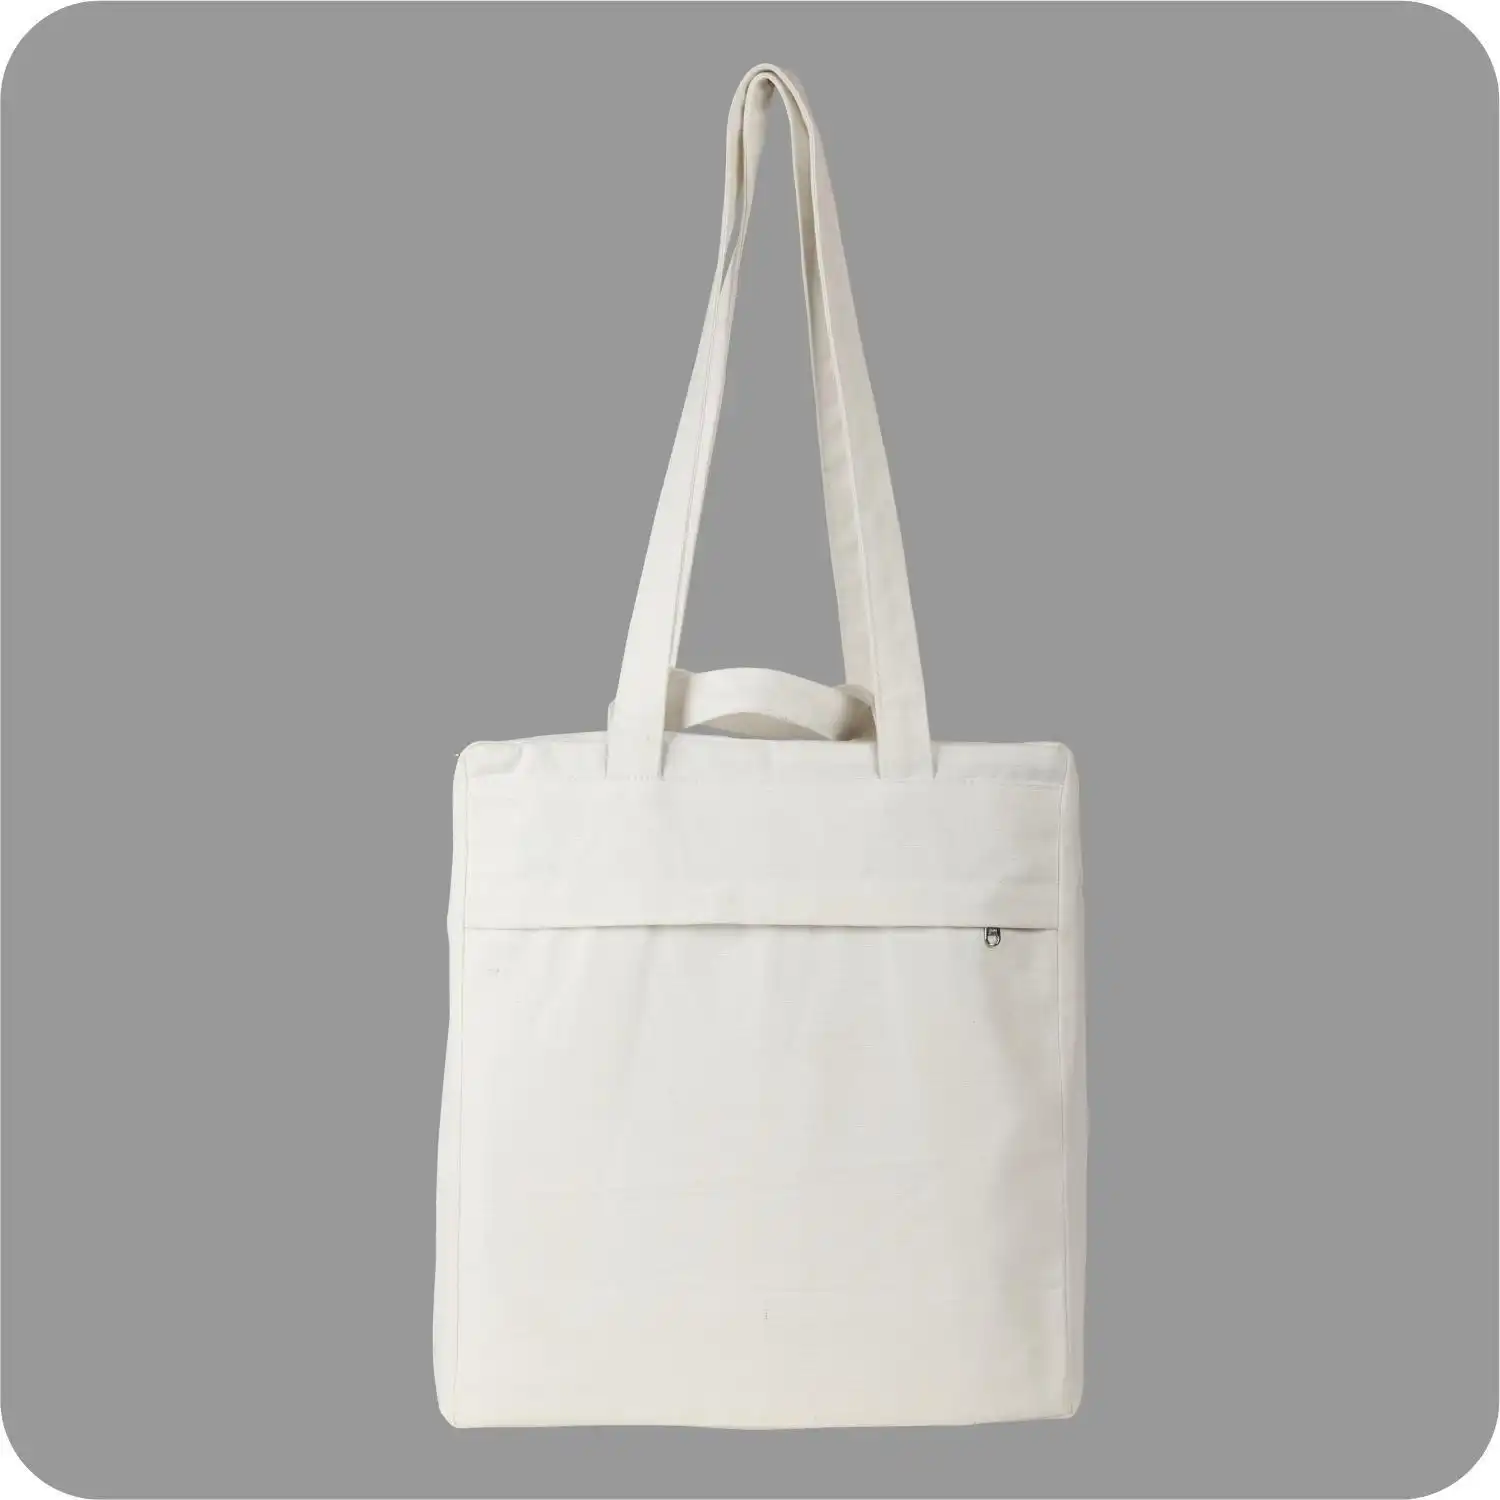 Back Pack/Shoulder Travelling Canvas Bags Made of Pure Cotton Fiber